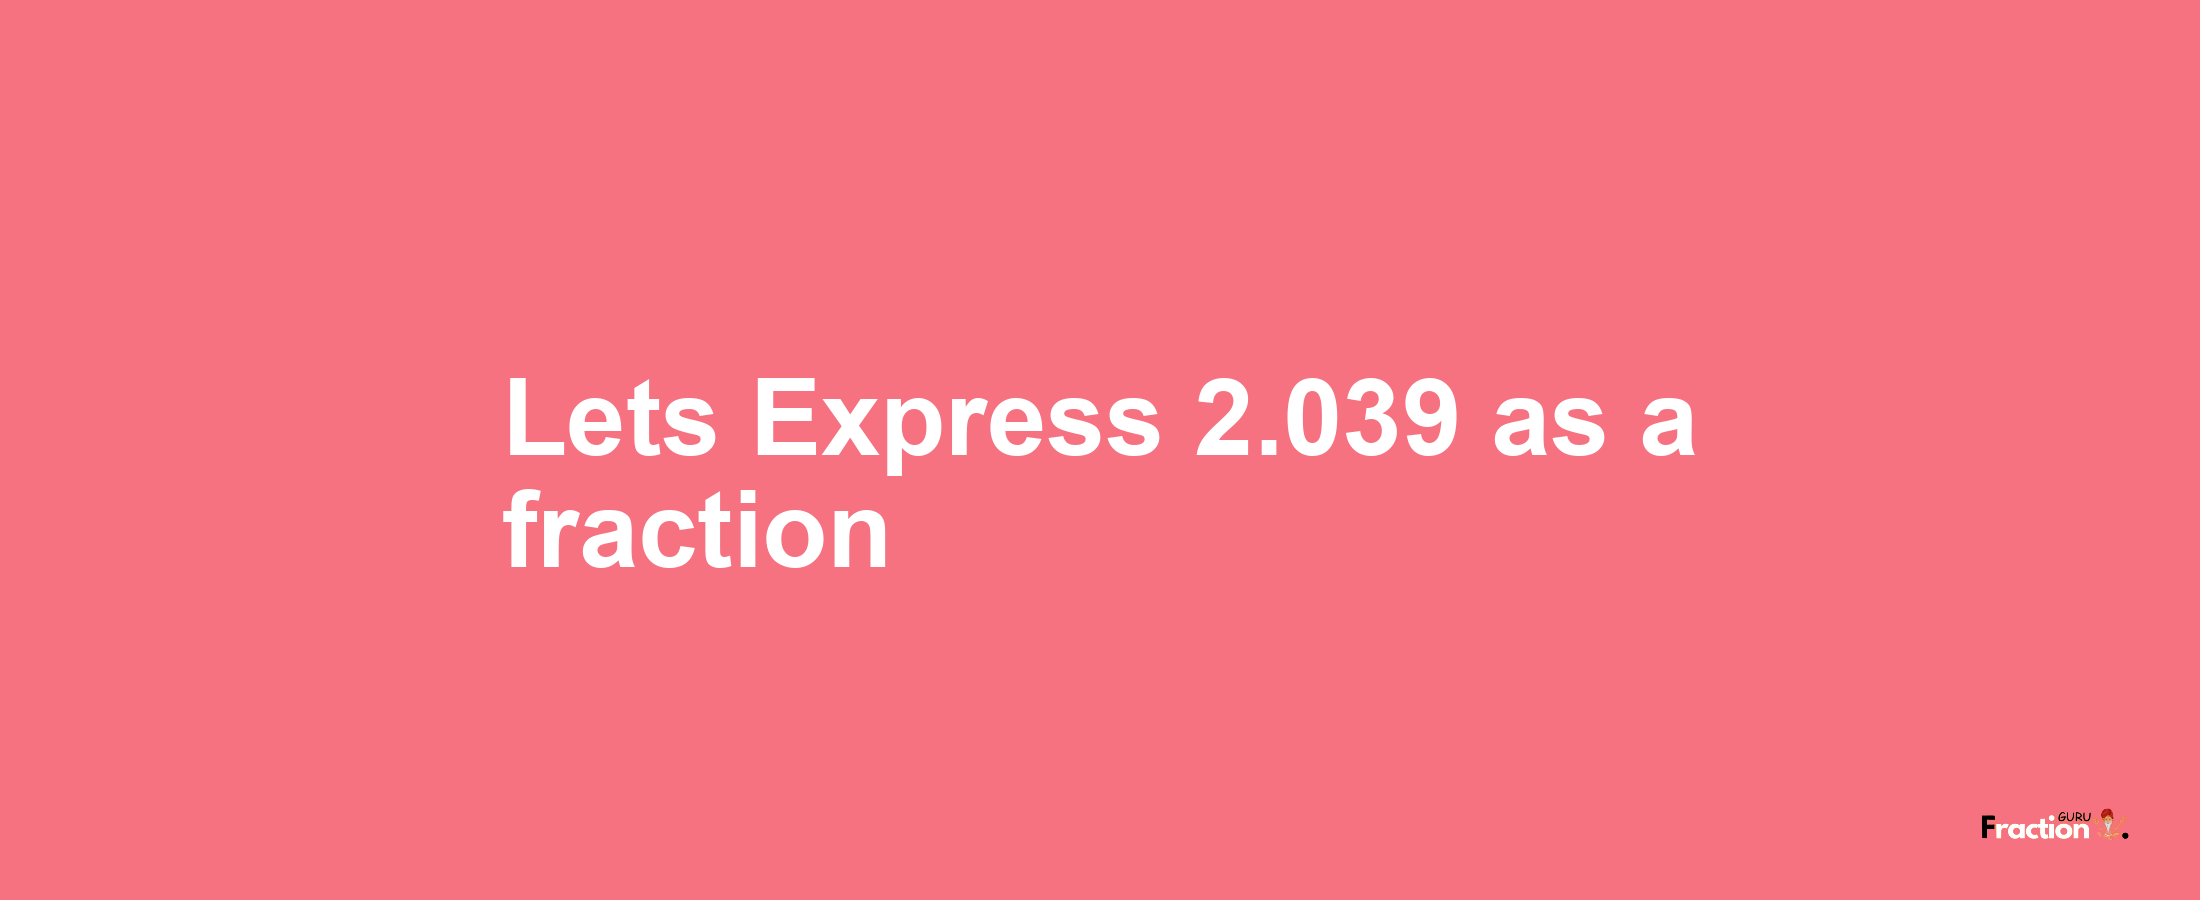 Lets Express 2.039 as afraction